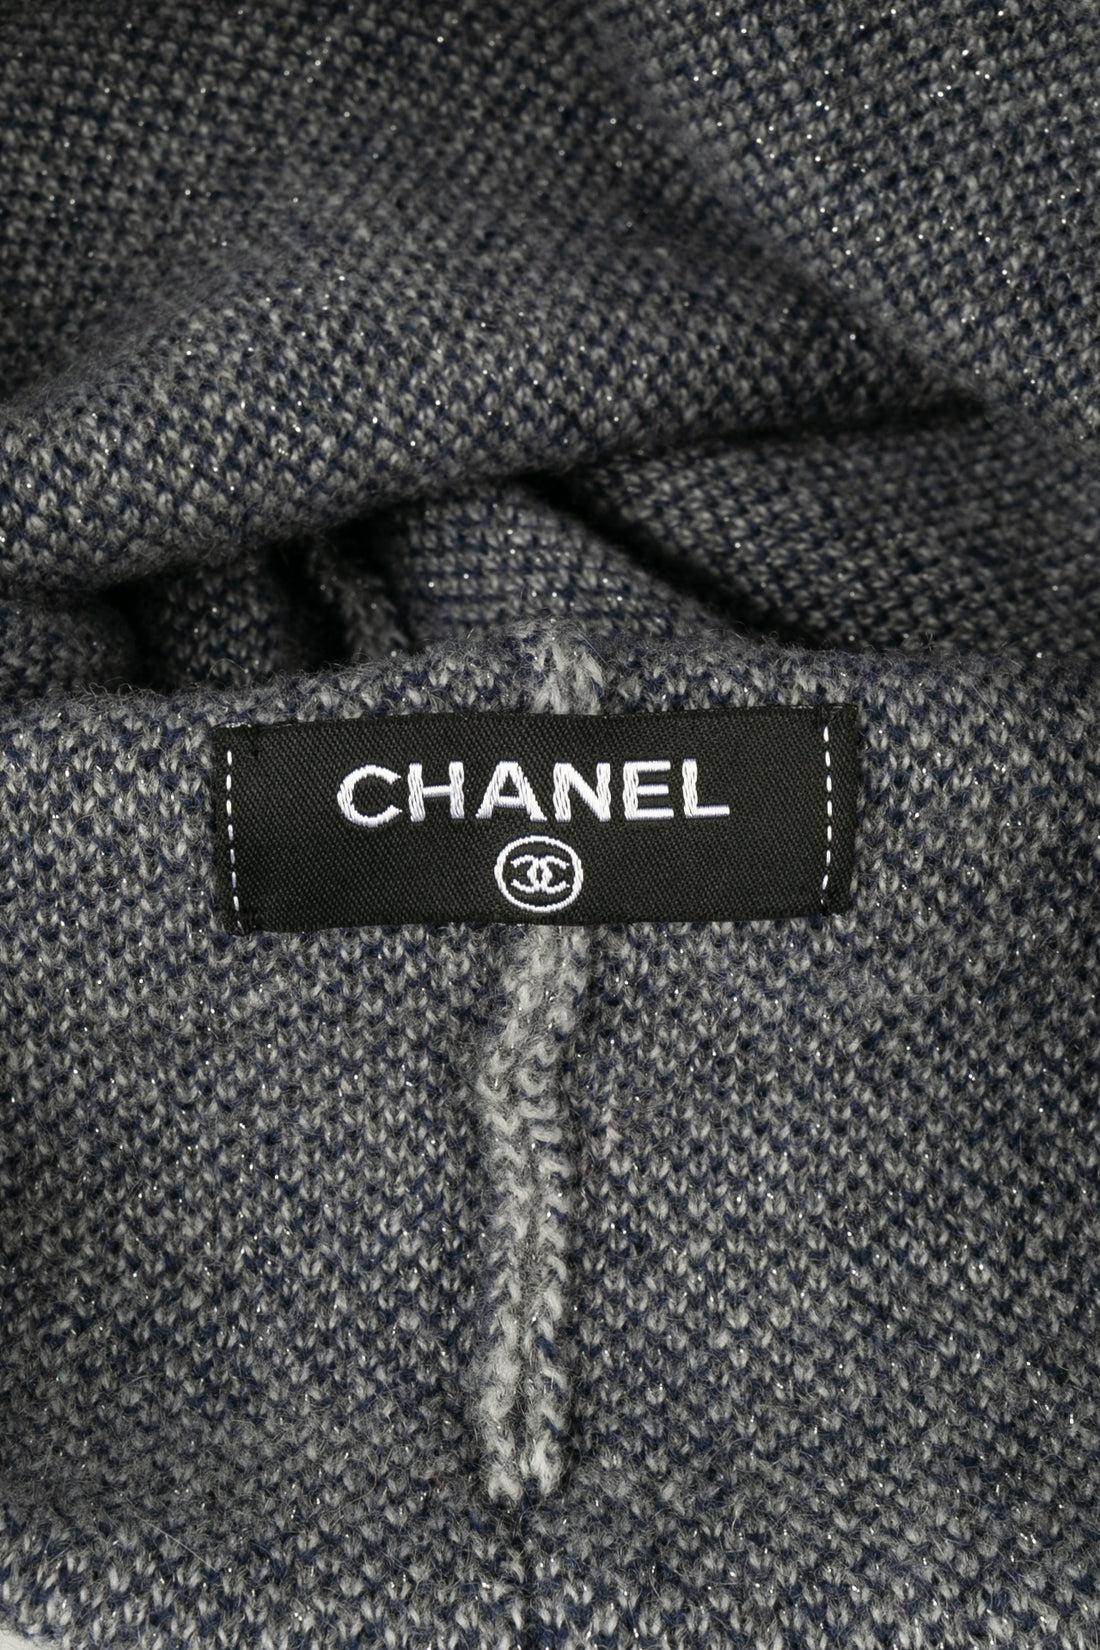 Chanel Winter Scarf, Hat, and Pair of Gloves Set 5